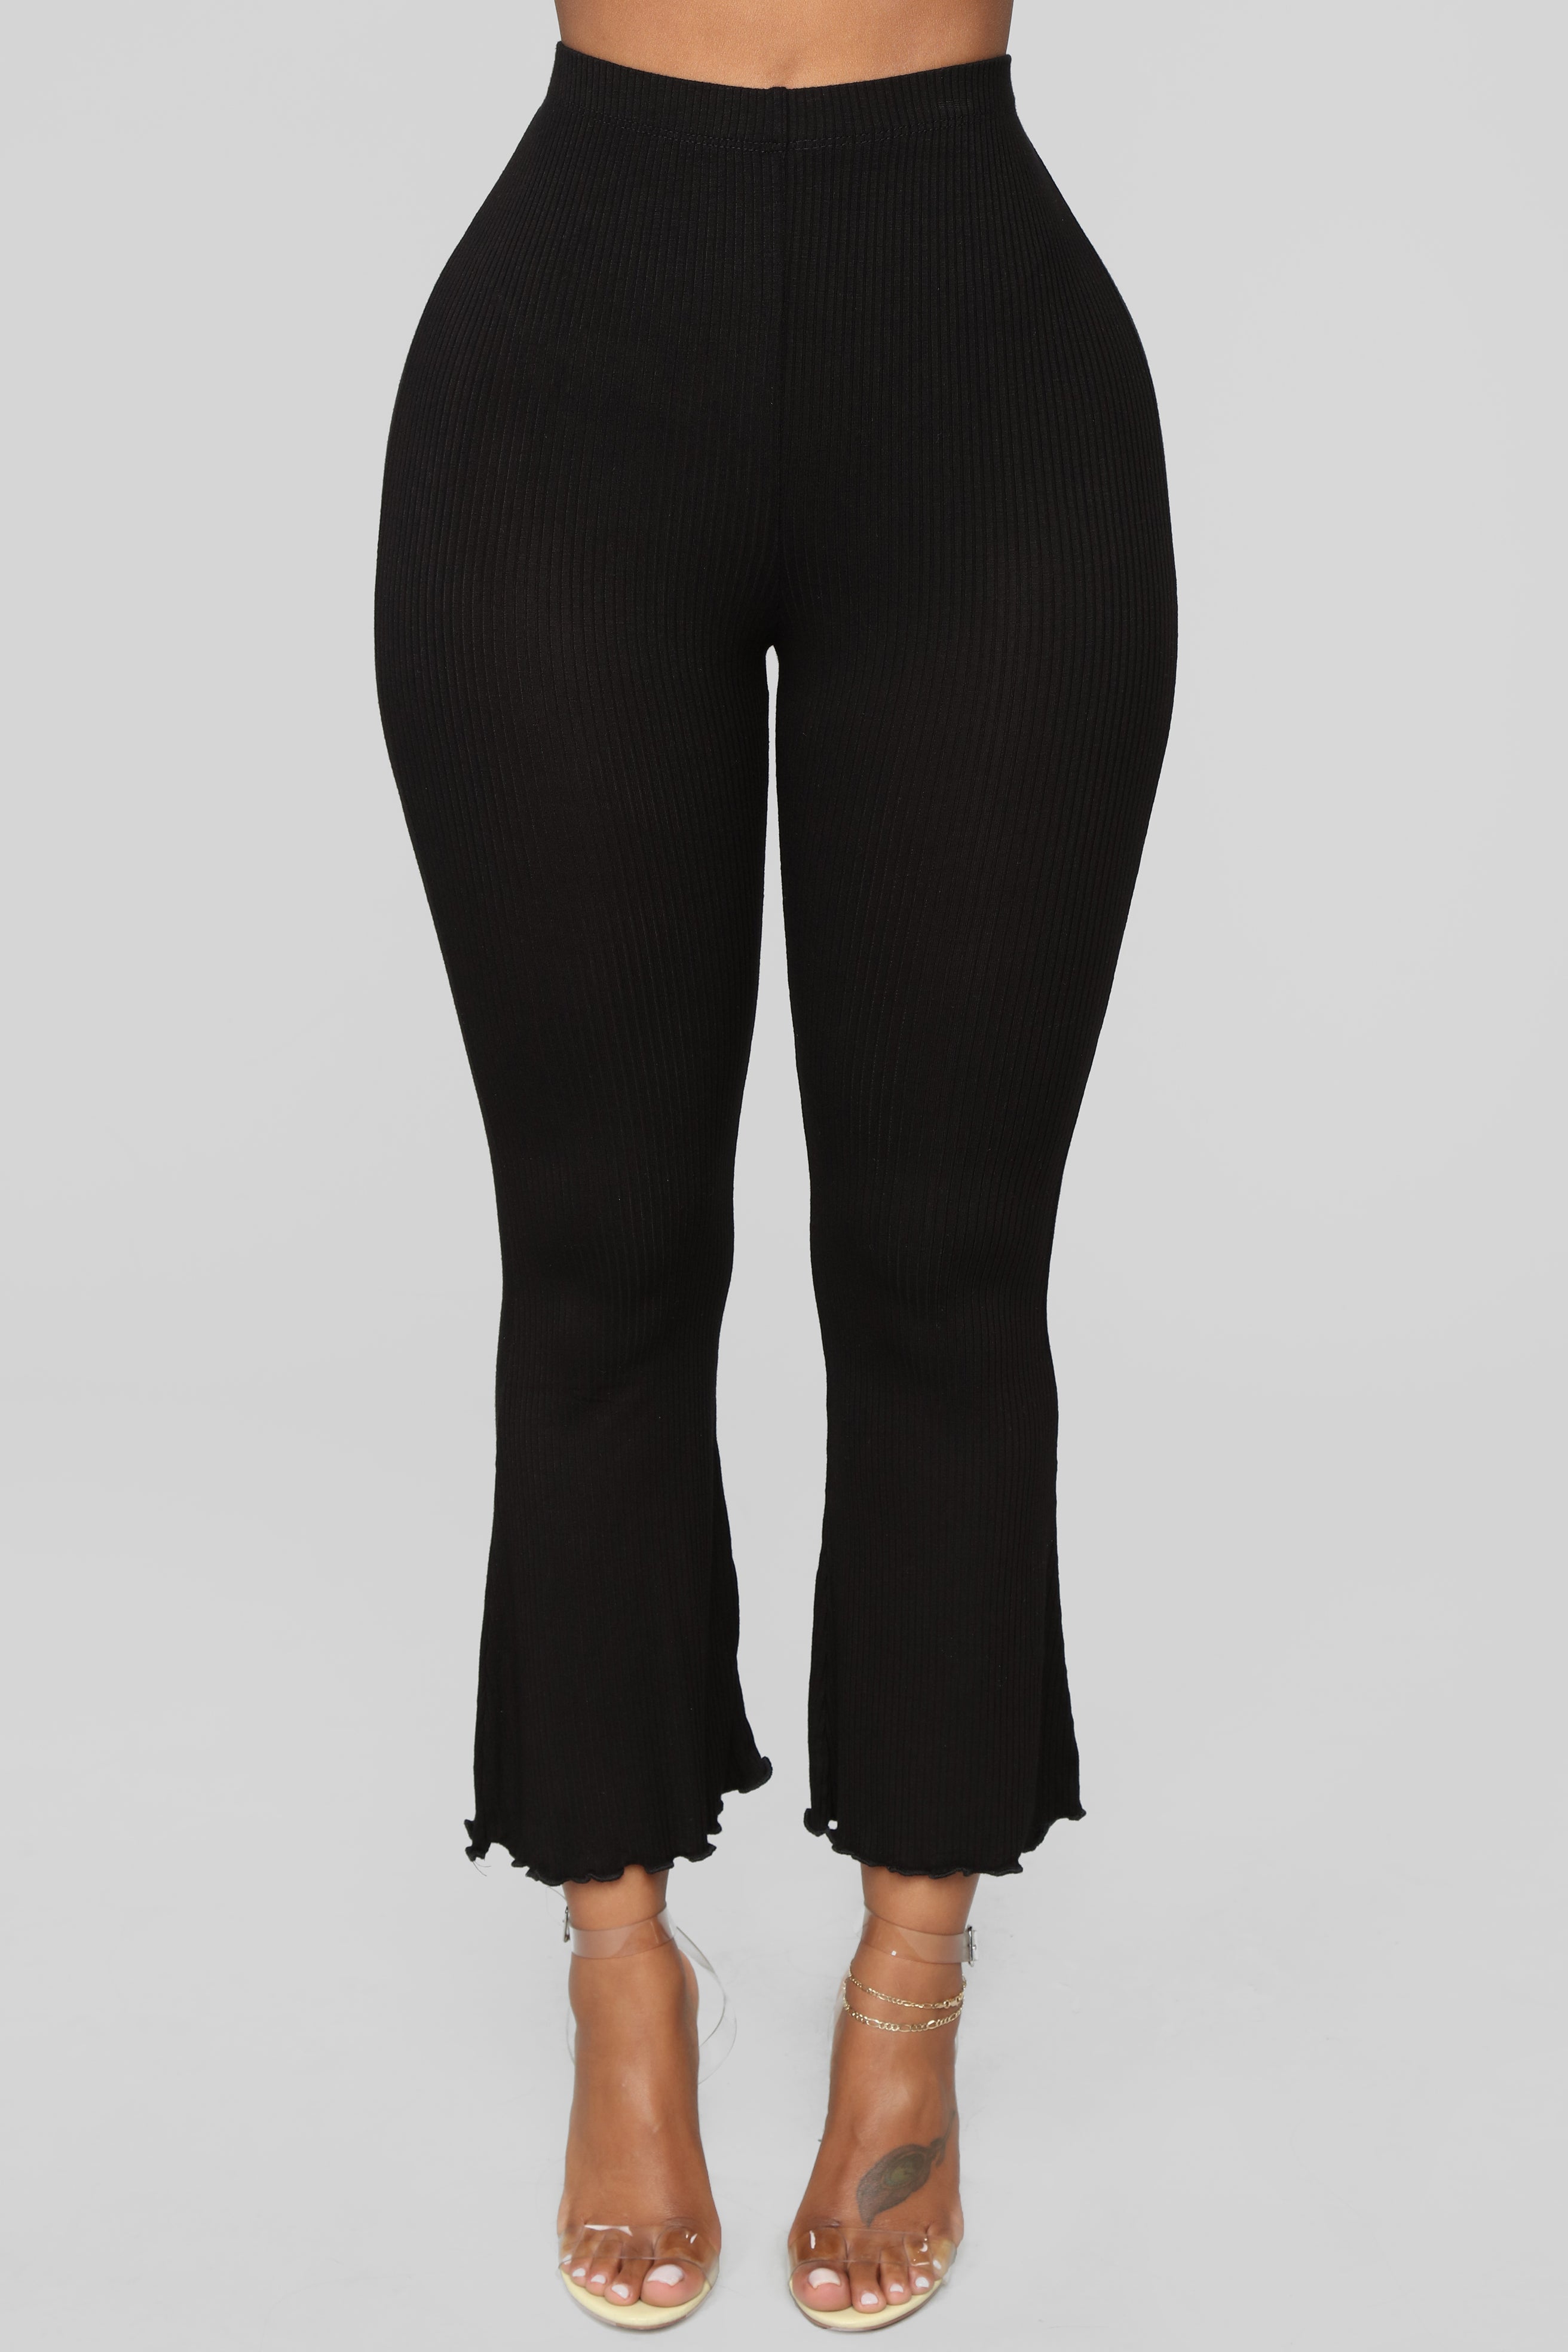 Petite Black Ribbed Flared Leggings  International Society of Precision  Agriculture